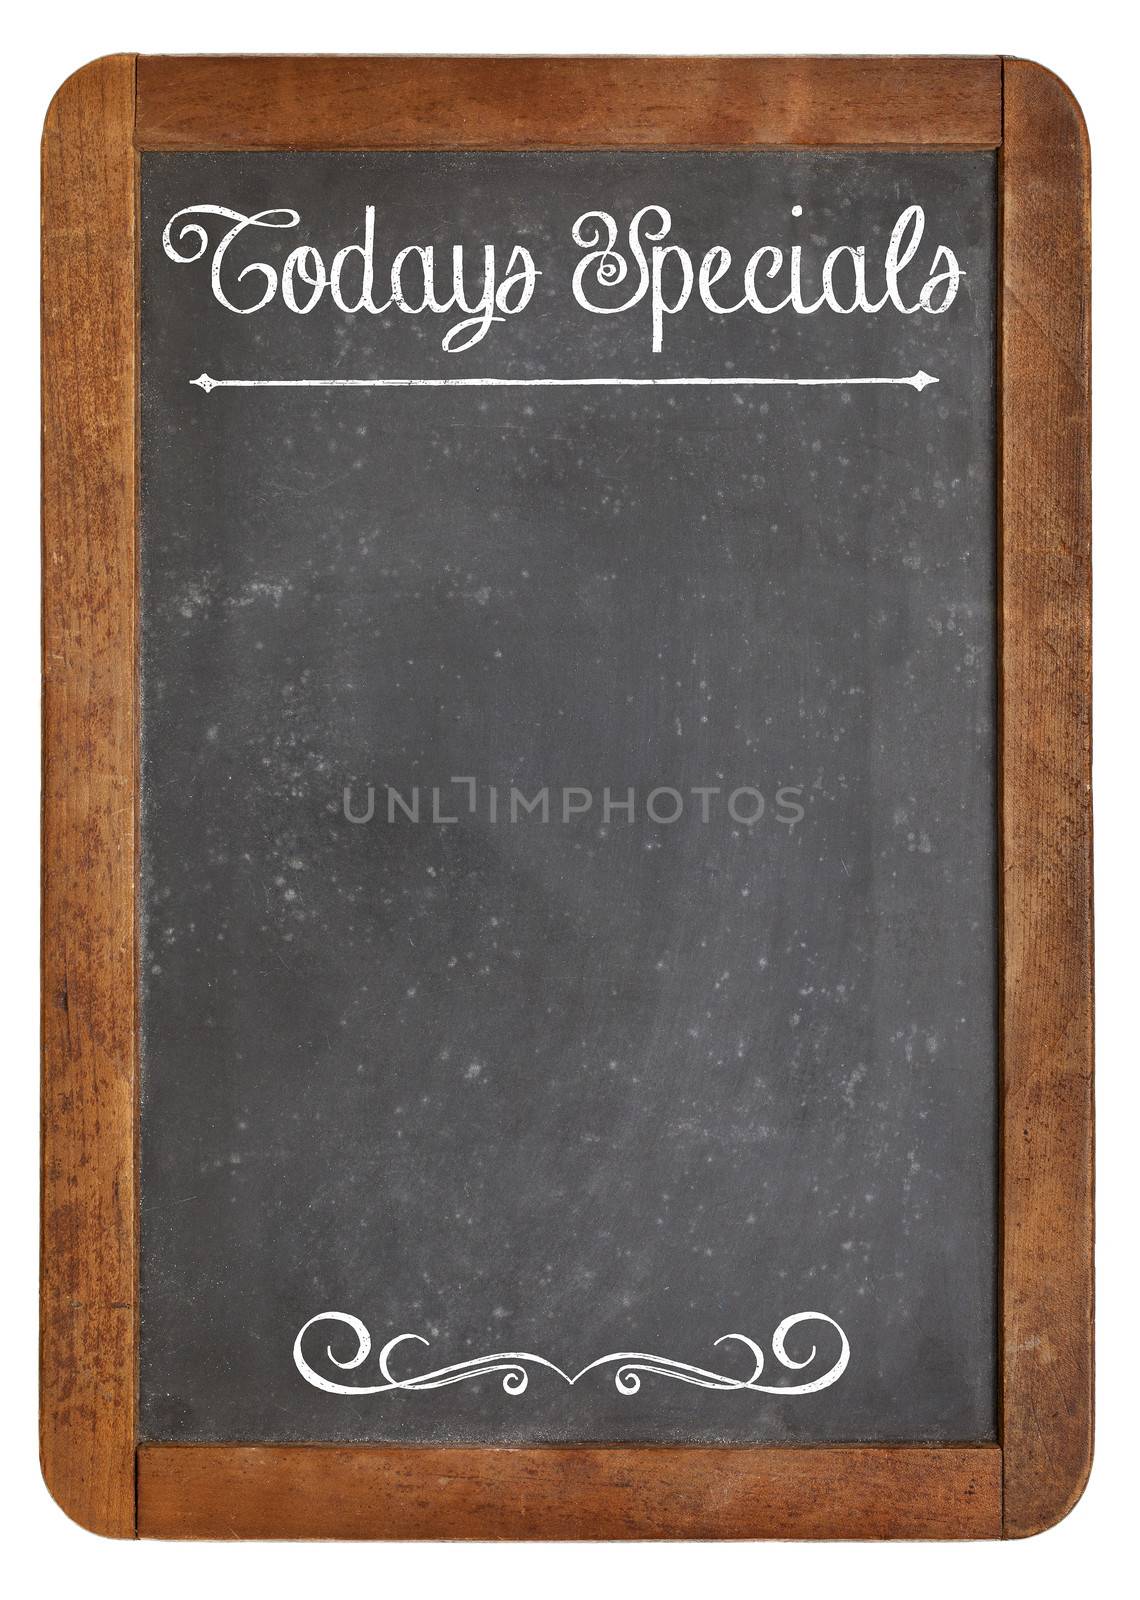 Today Specials - white chalk menu sign on a vintage slate blackboard isolated on white